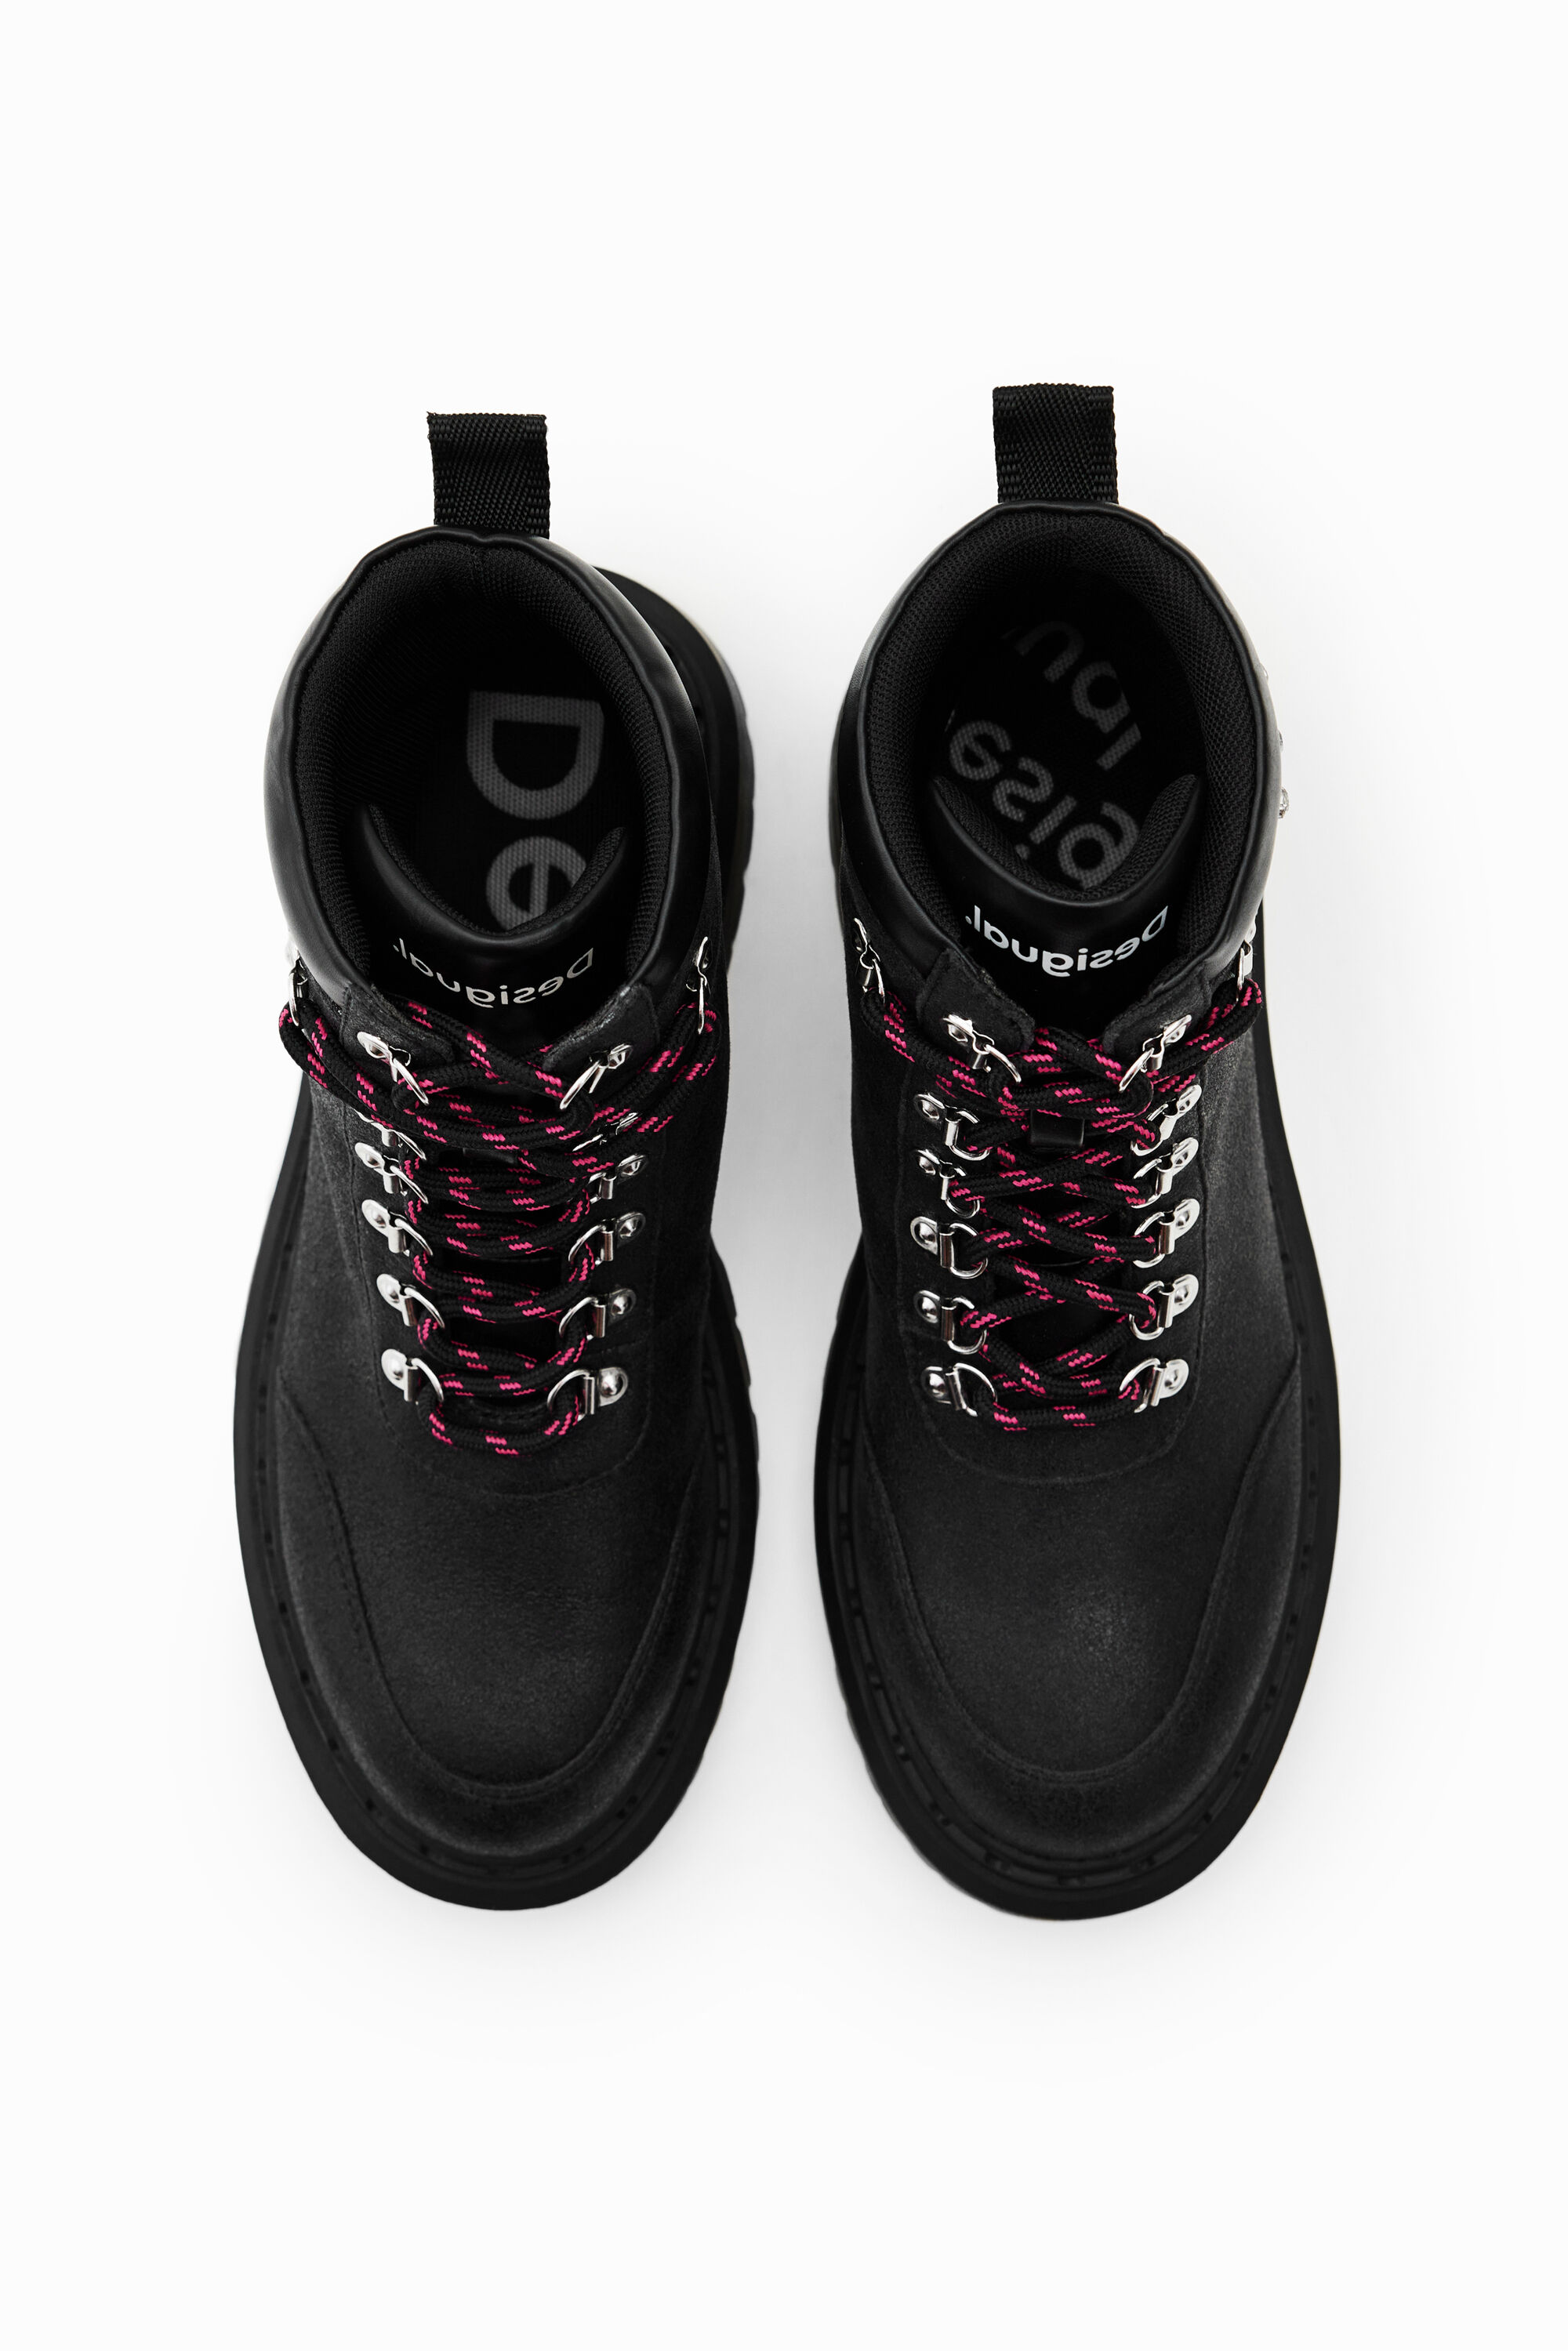 Lace-up boots with crystals Desigual Women Shoes Boots Lace-up Boots 